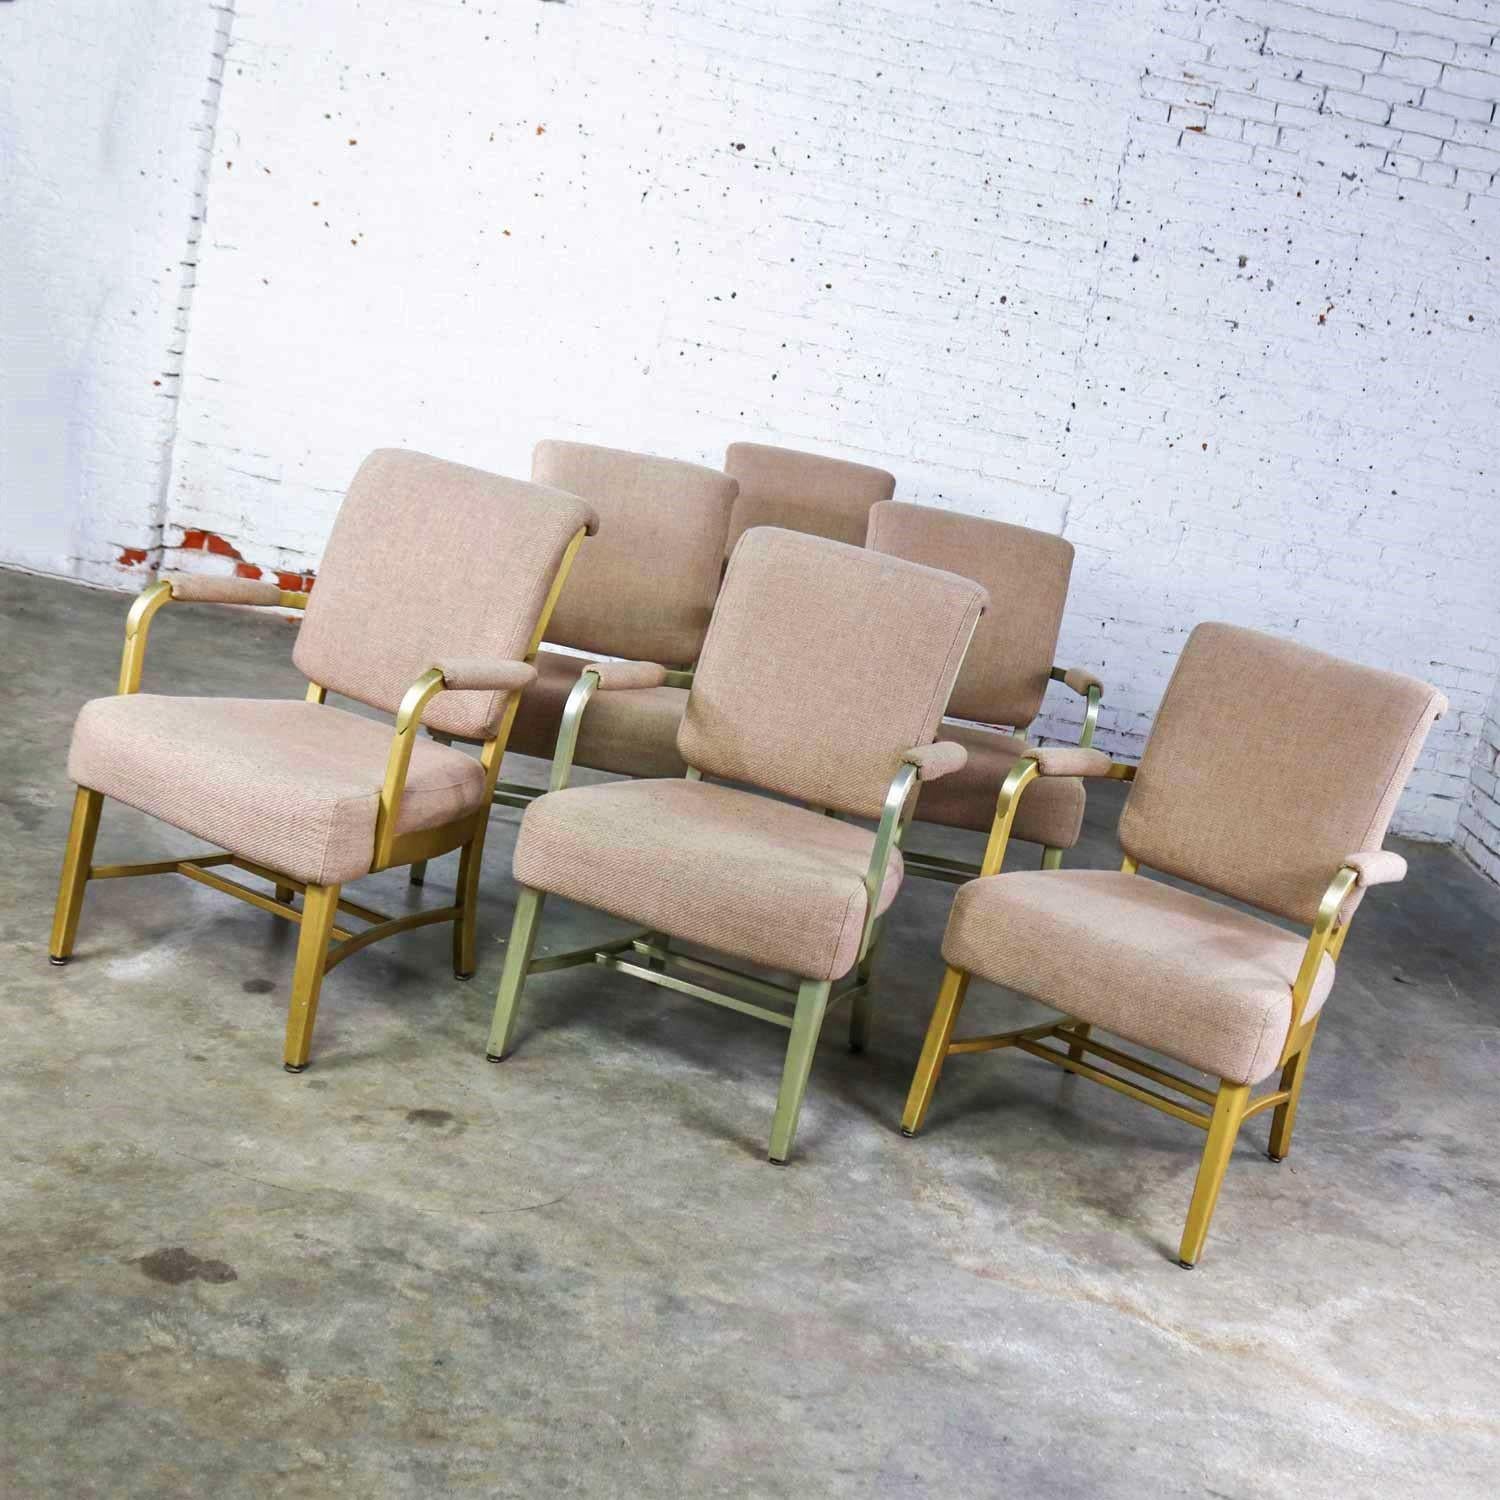 Handsome set of 6 Goodform mid-century machine age and industrial style aluminum armchairs by General Fireproofing Company. Comprised of anodized slightly gold colored aluminum frames and upholstered in a woven beige fabric. They are in wonderful